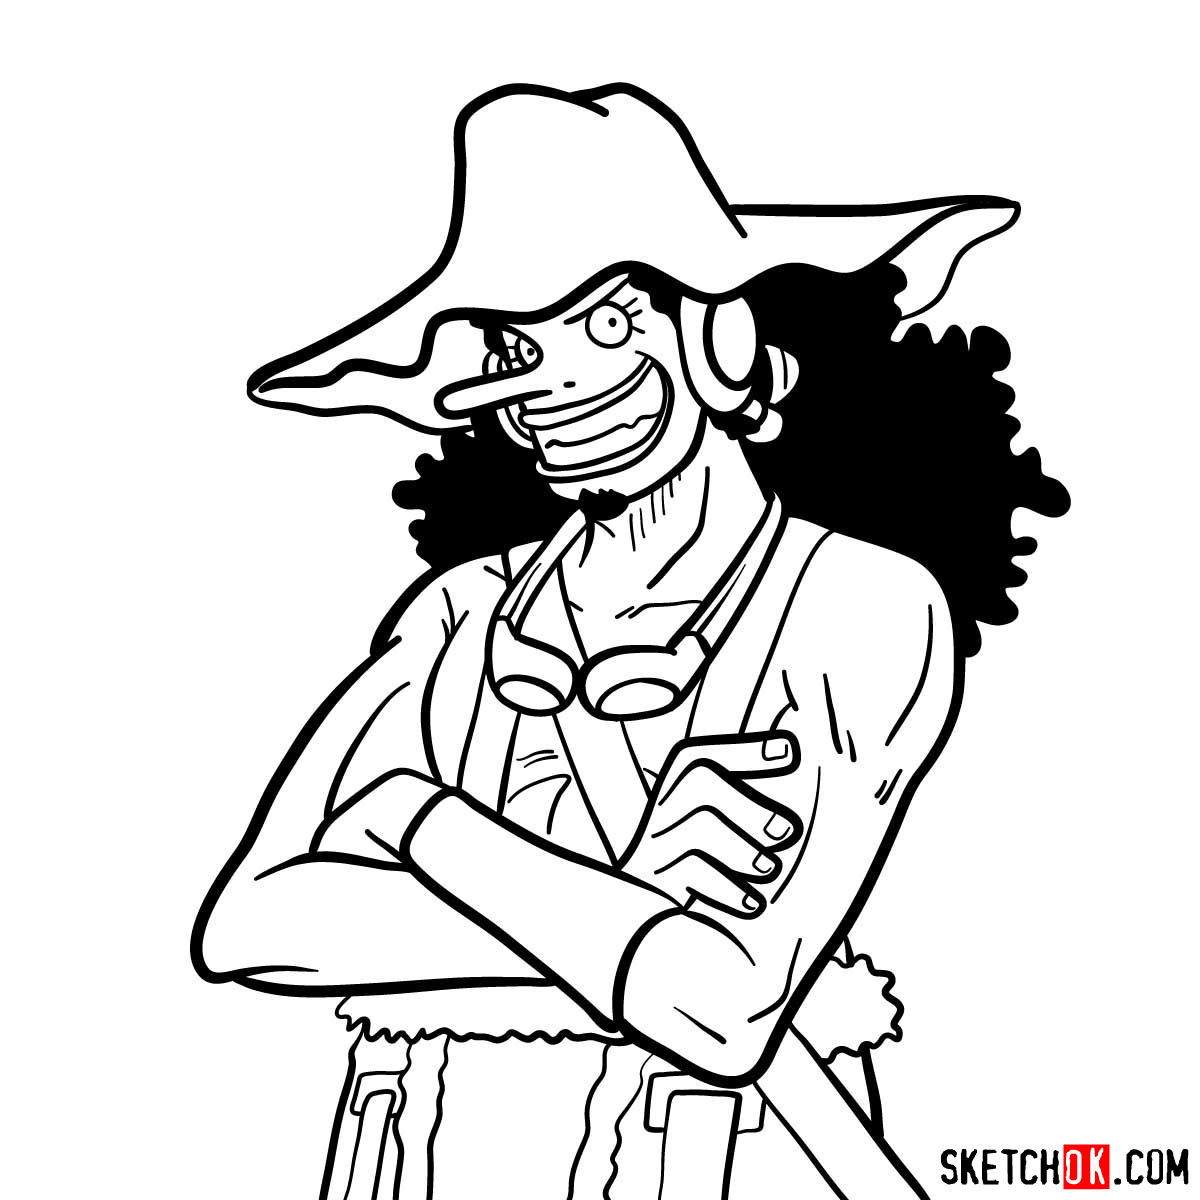 How to draw Usopp from One Piece